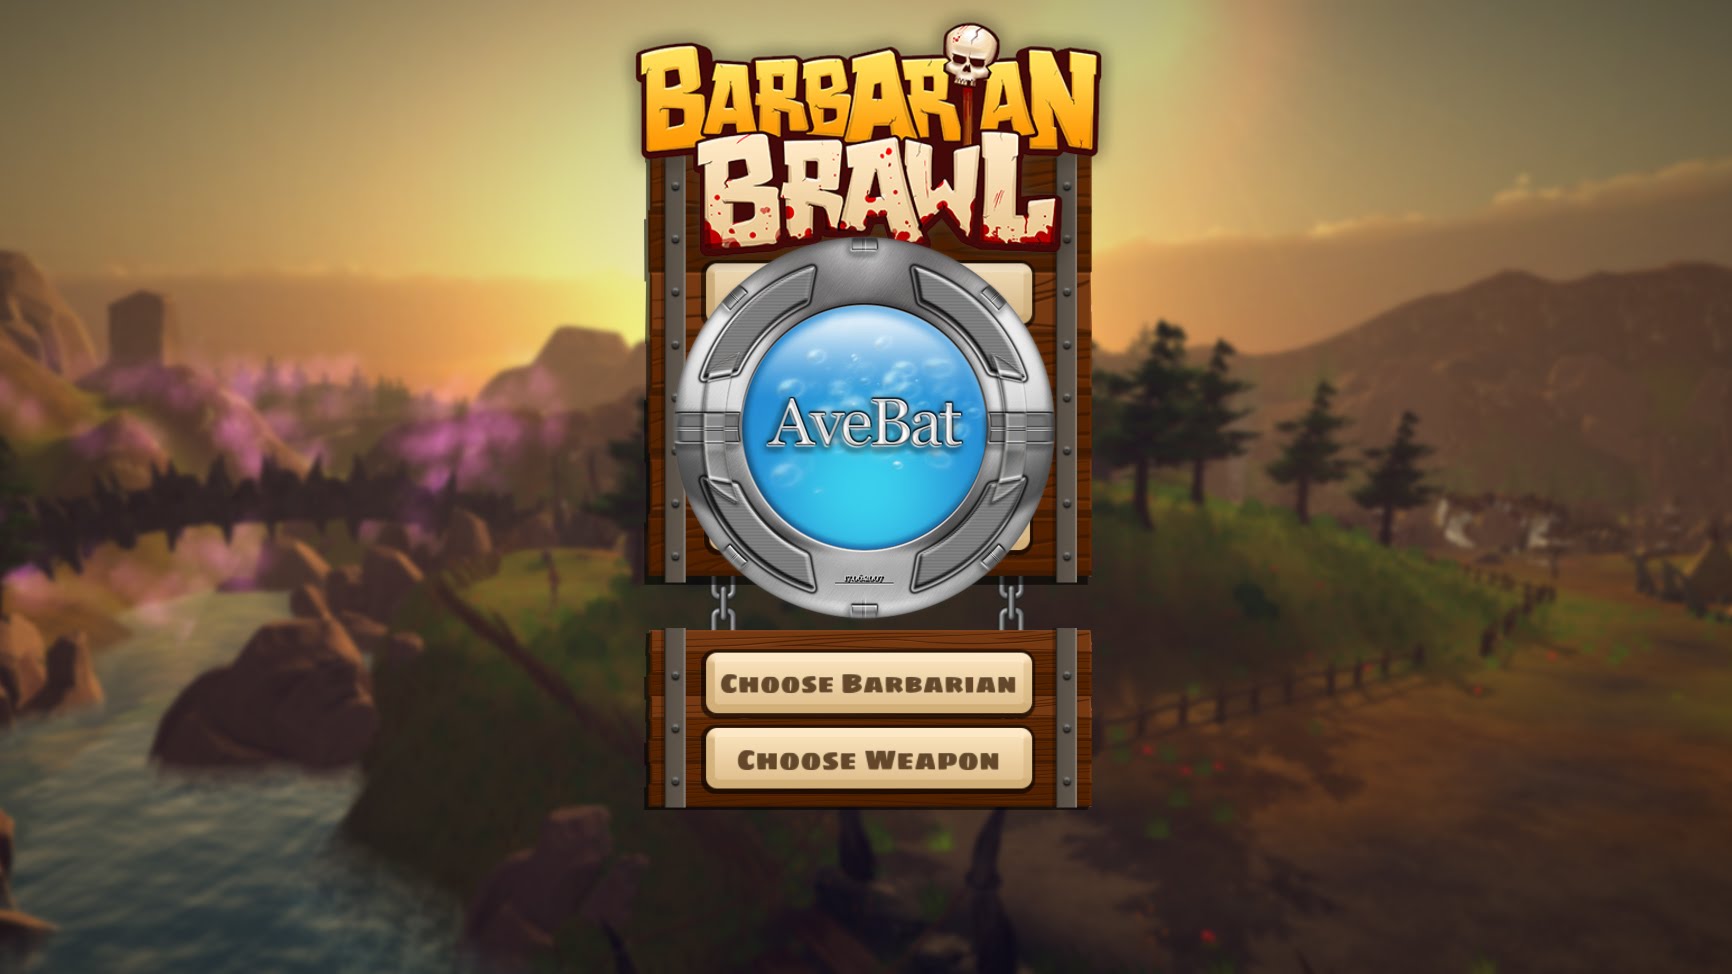 Barbarian Brawl Backgrounds, Compatible - PC, Mobile, Gadgets| 1732x974 px